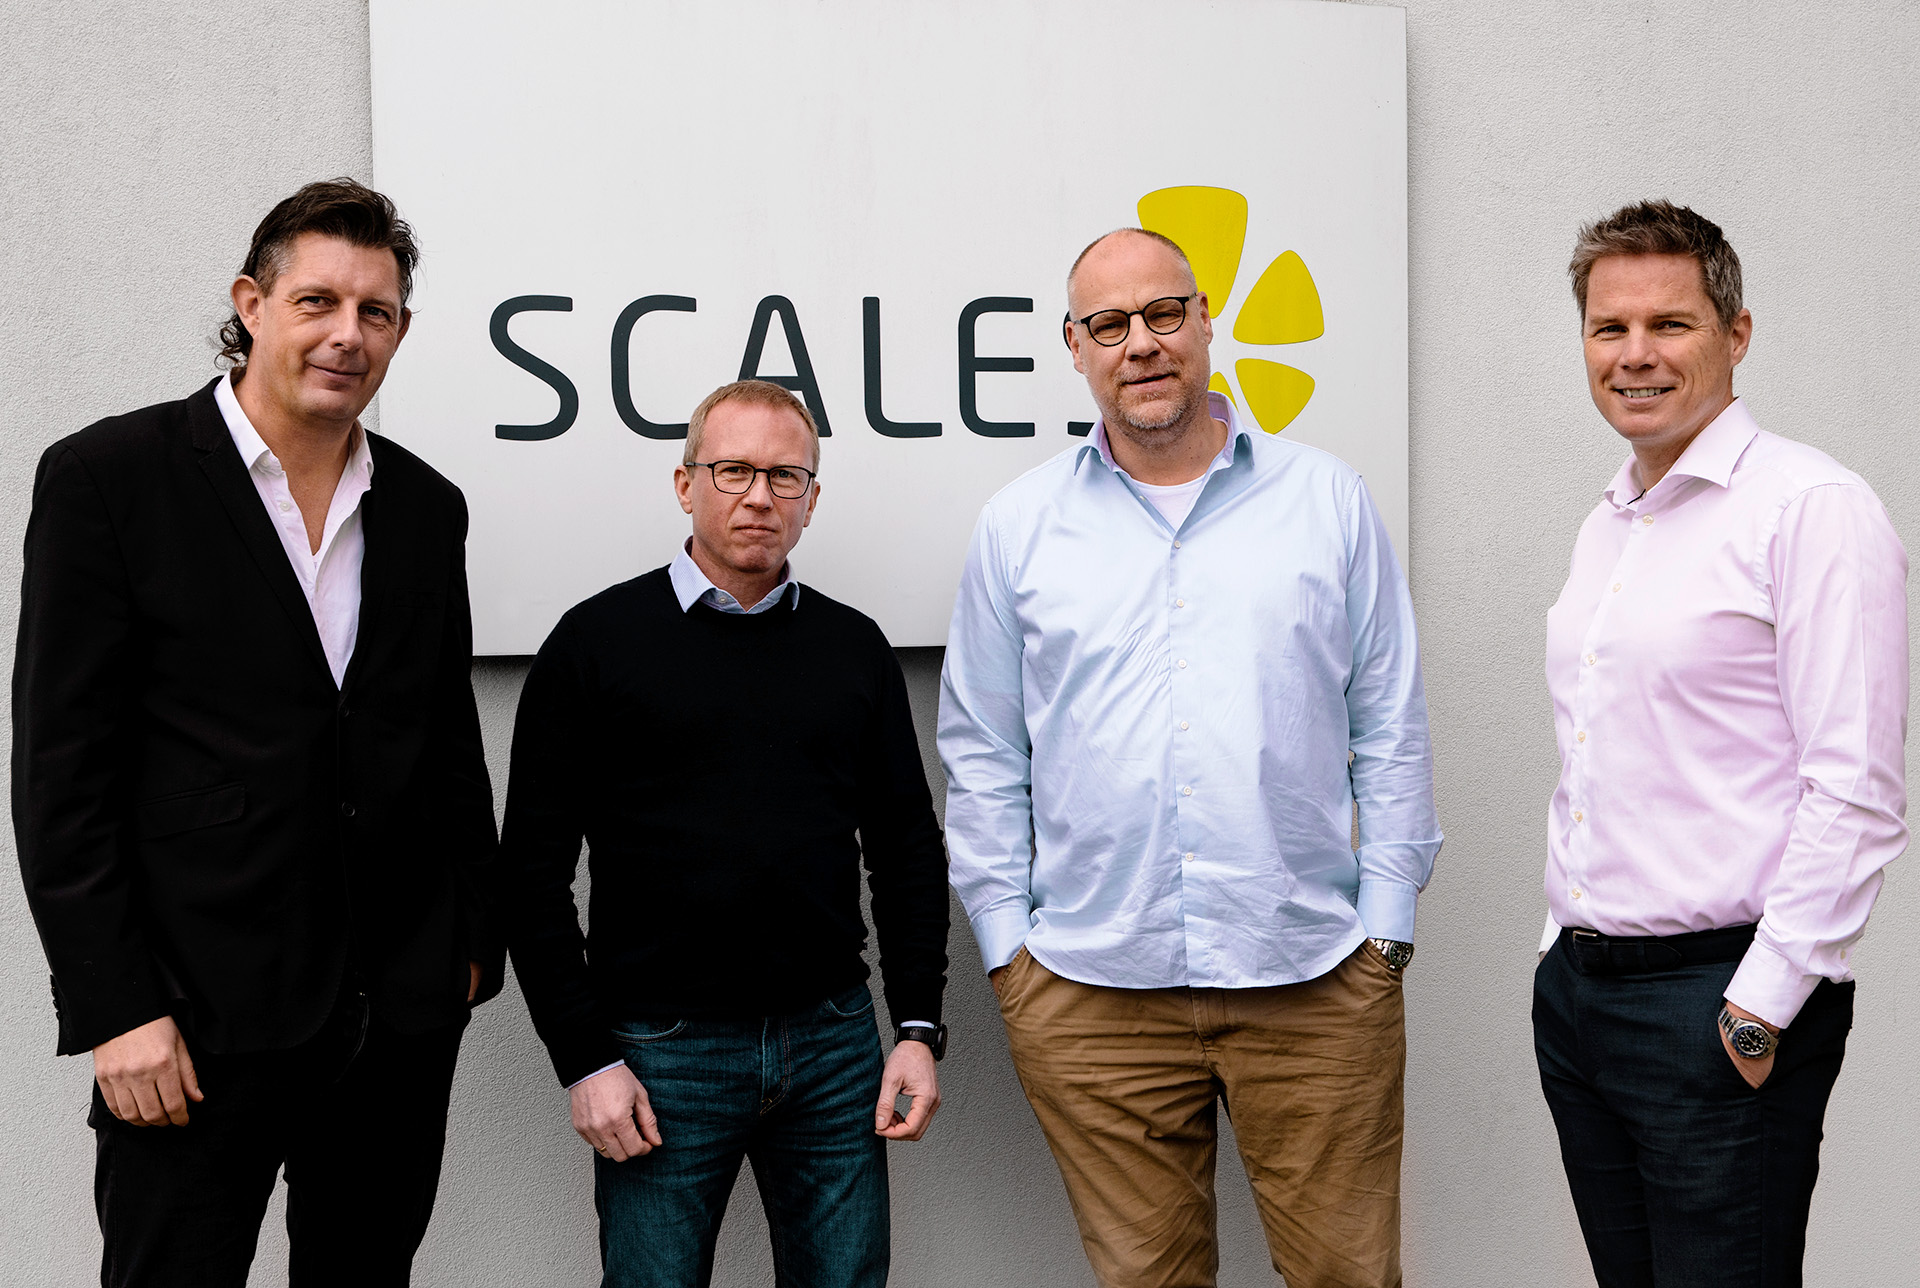 SCALES' four founders